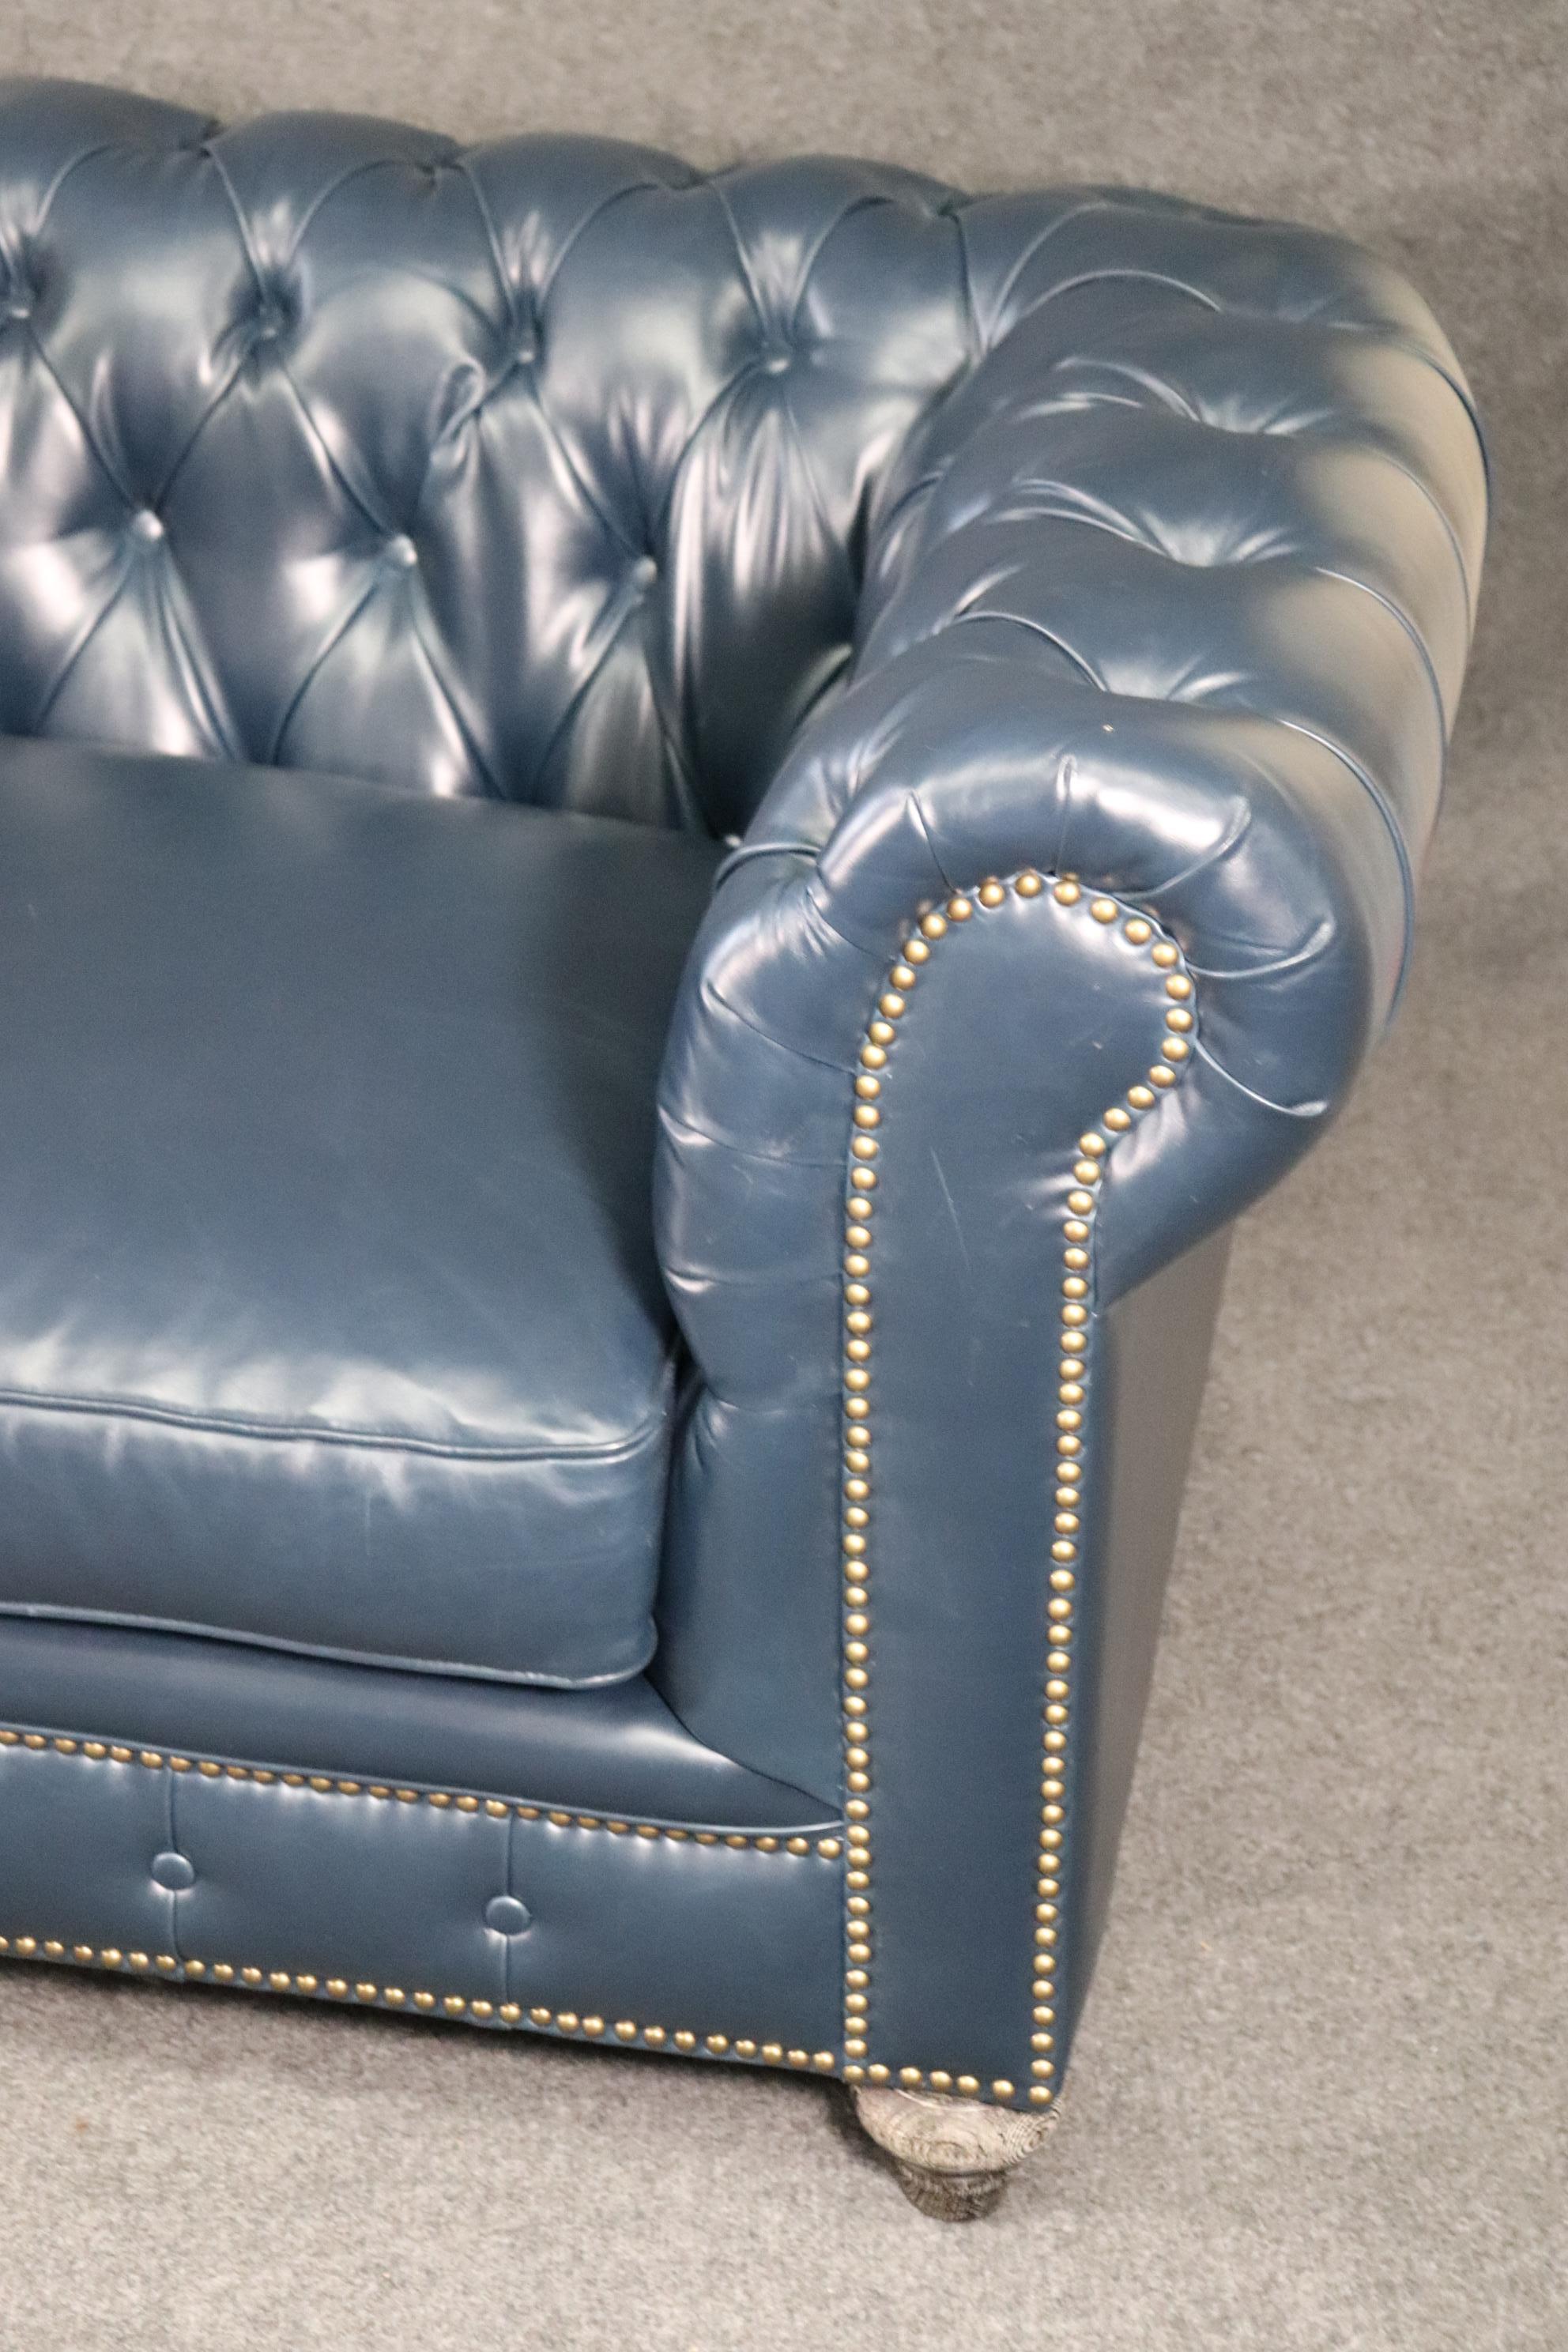 Pair High Quality Genuine Top Grain Leather Chesterfield Club Chairs Navy Blue 6